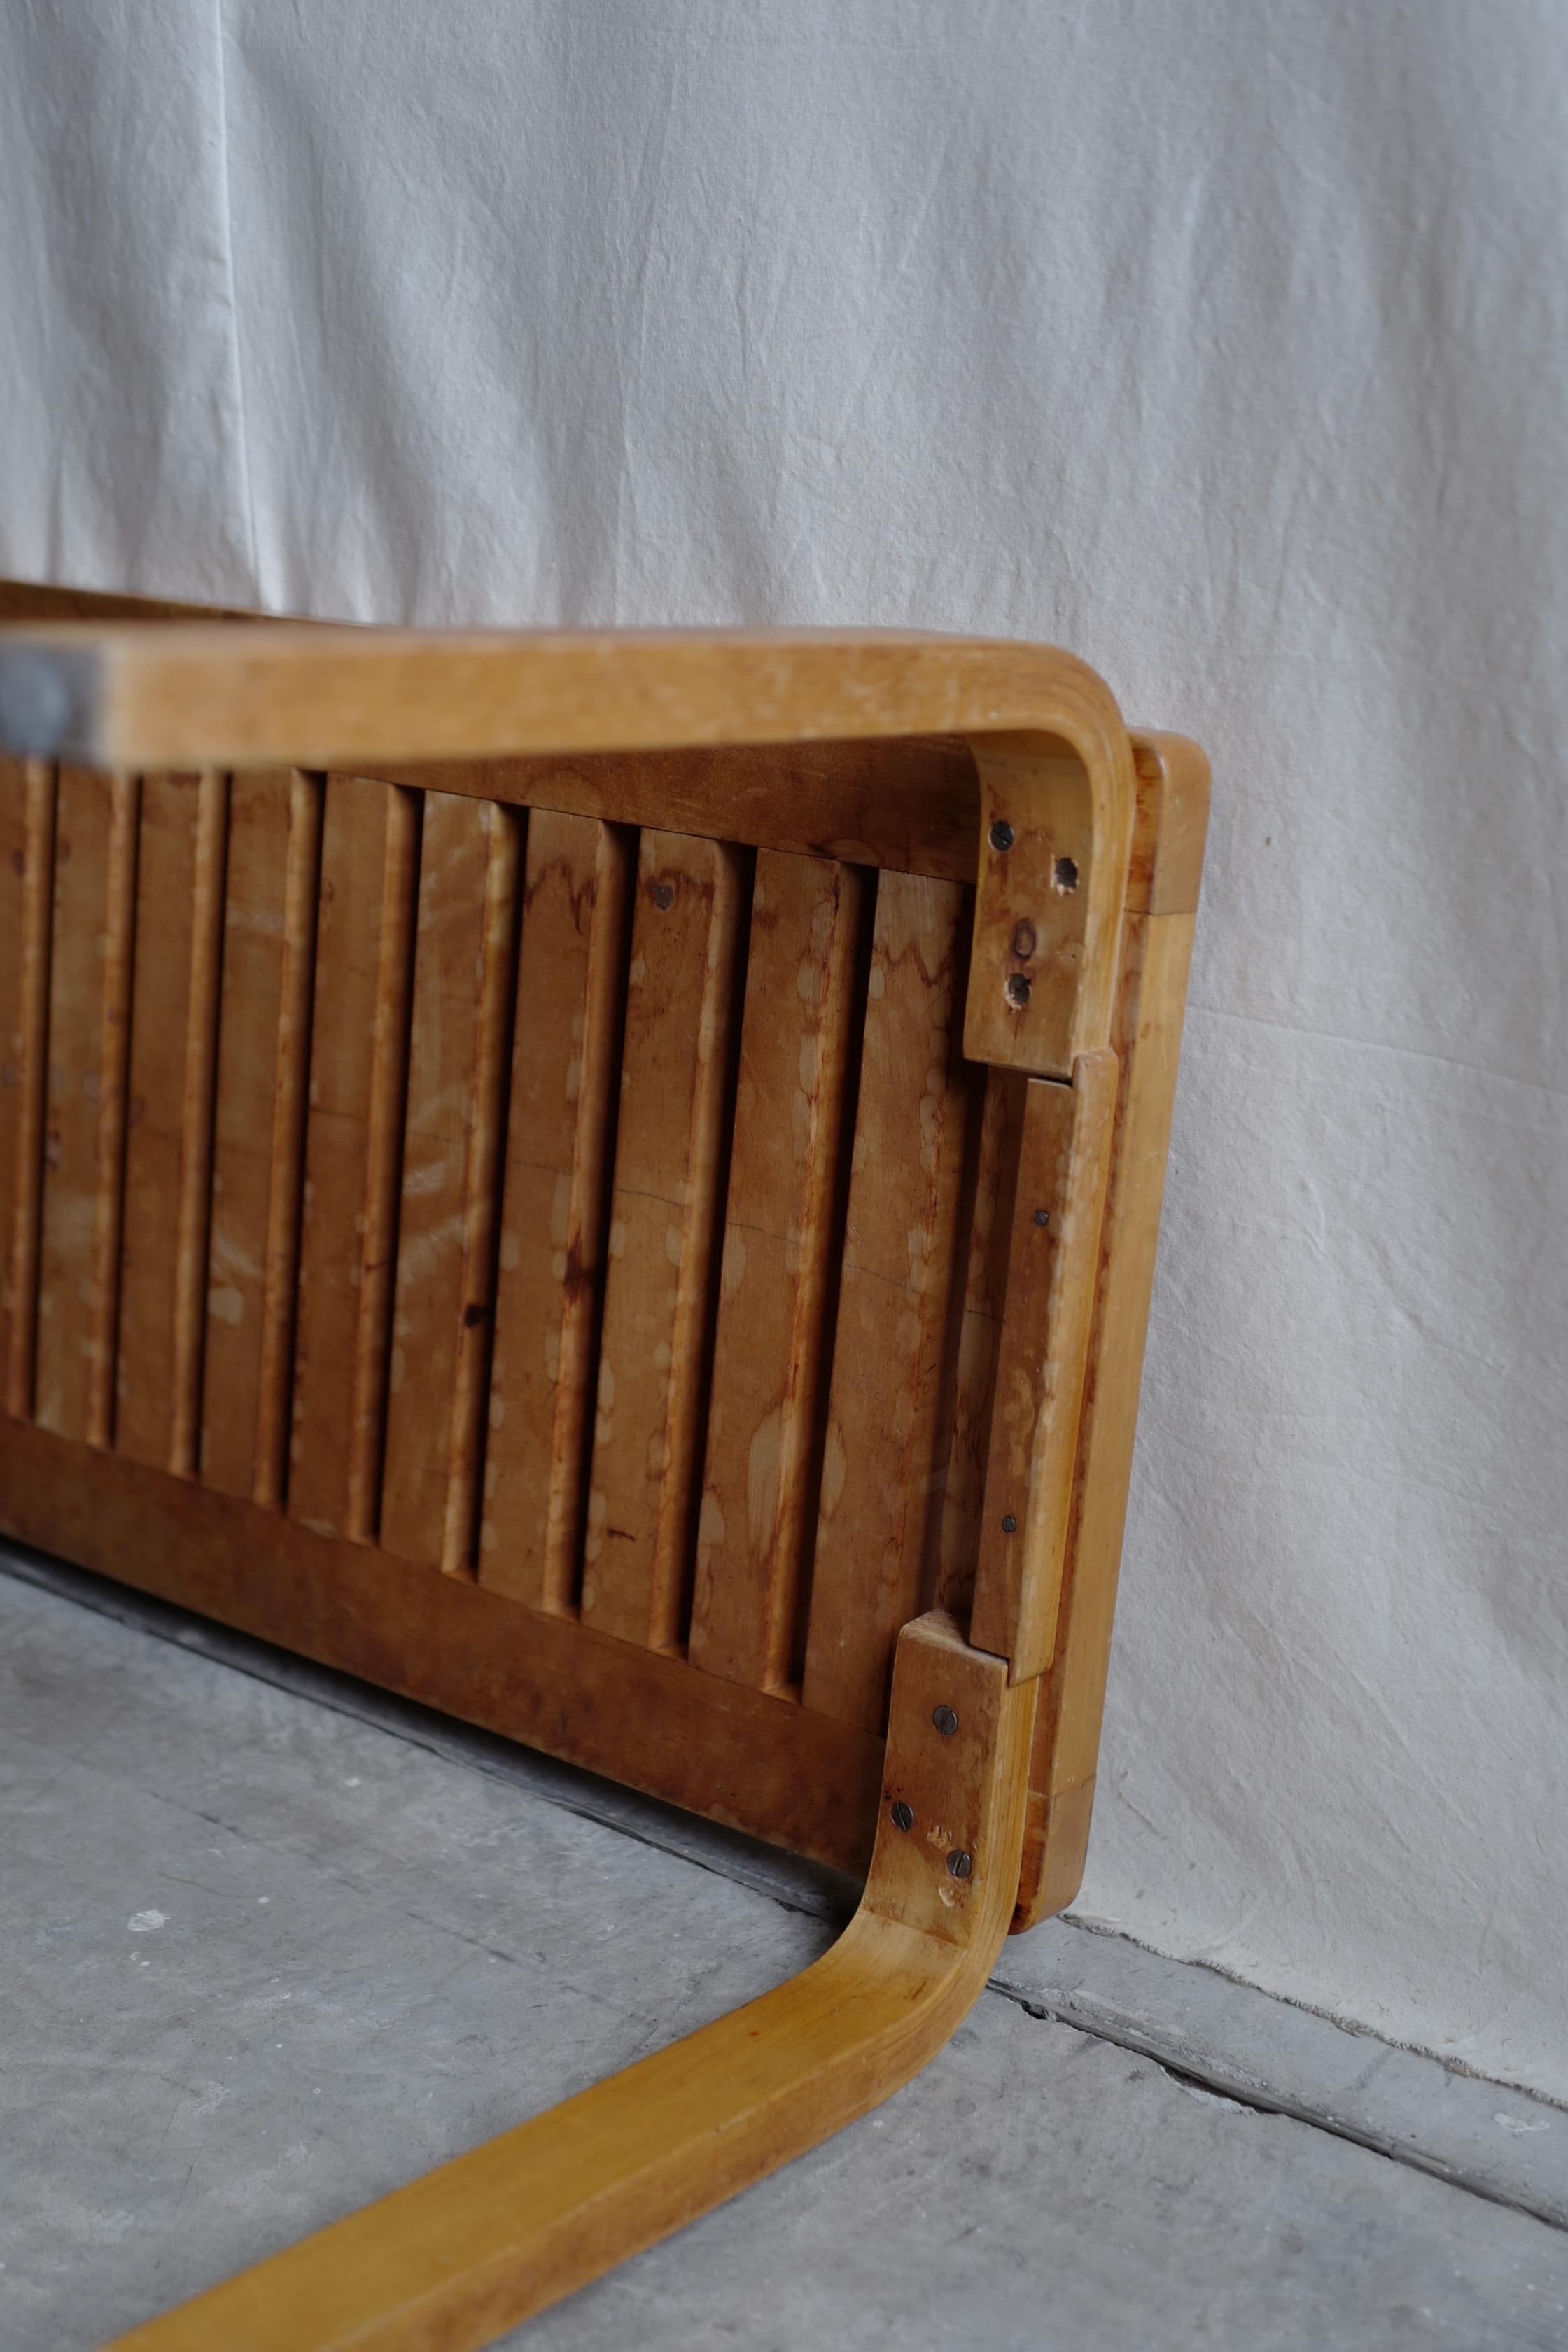 alvar aalto design 153A bench.
This condition is very nice patine and original finish. 